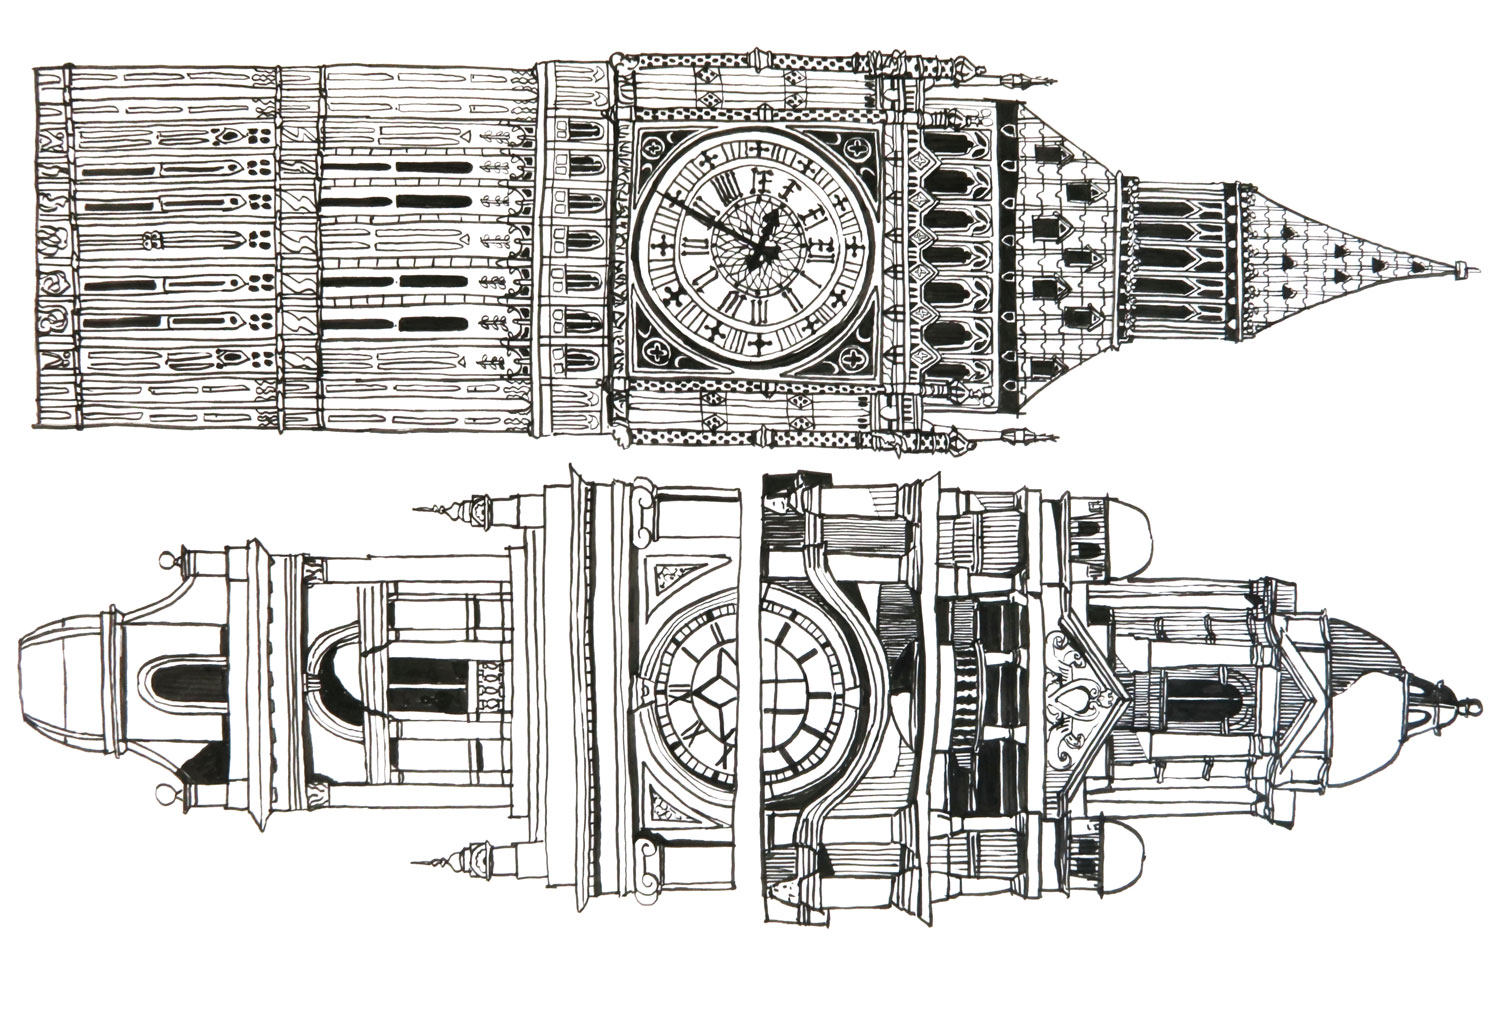 Above - Elizabeth Tower (Big Ben), Westminster Palace, London. Below - clock towers from Luz Station, São Paulo and Flinders Street Station, Melbourne, both designed by English architect Henry Drive. Drawing by Pilar Quinteros